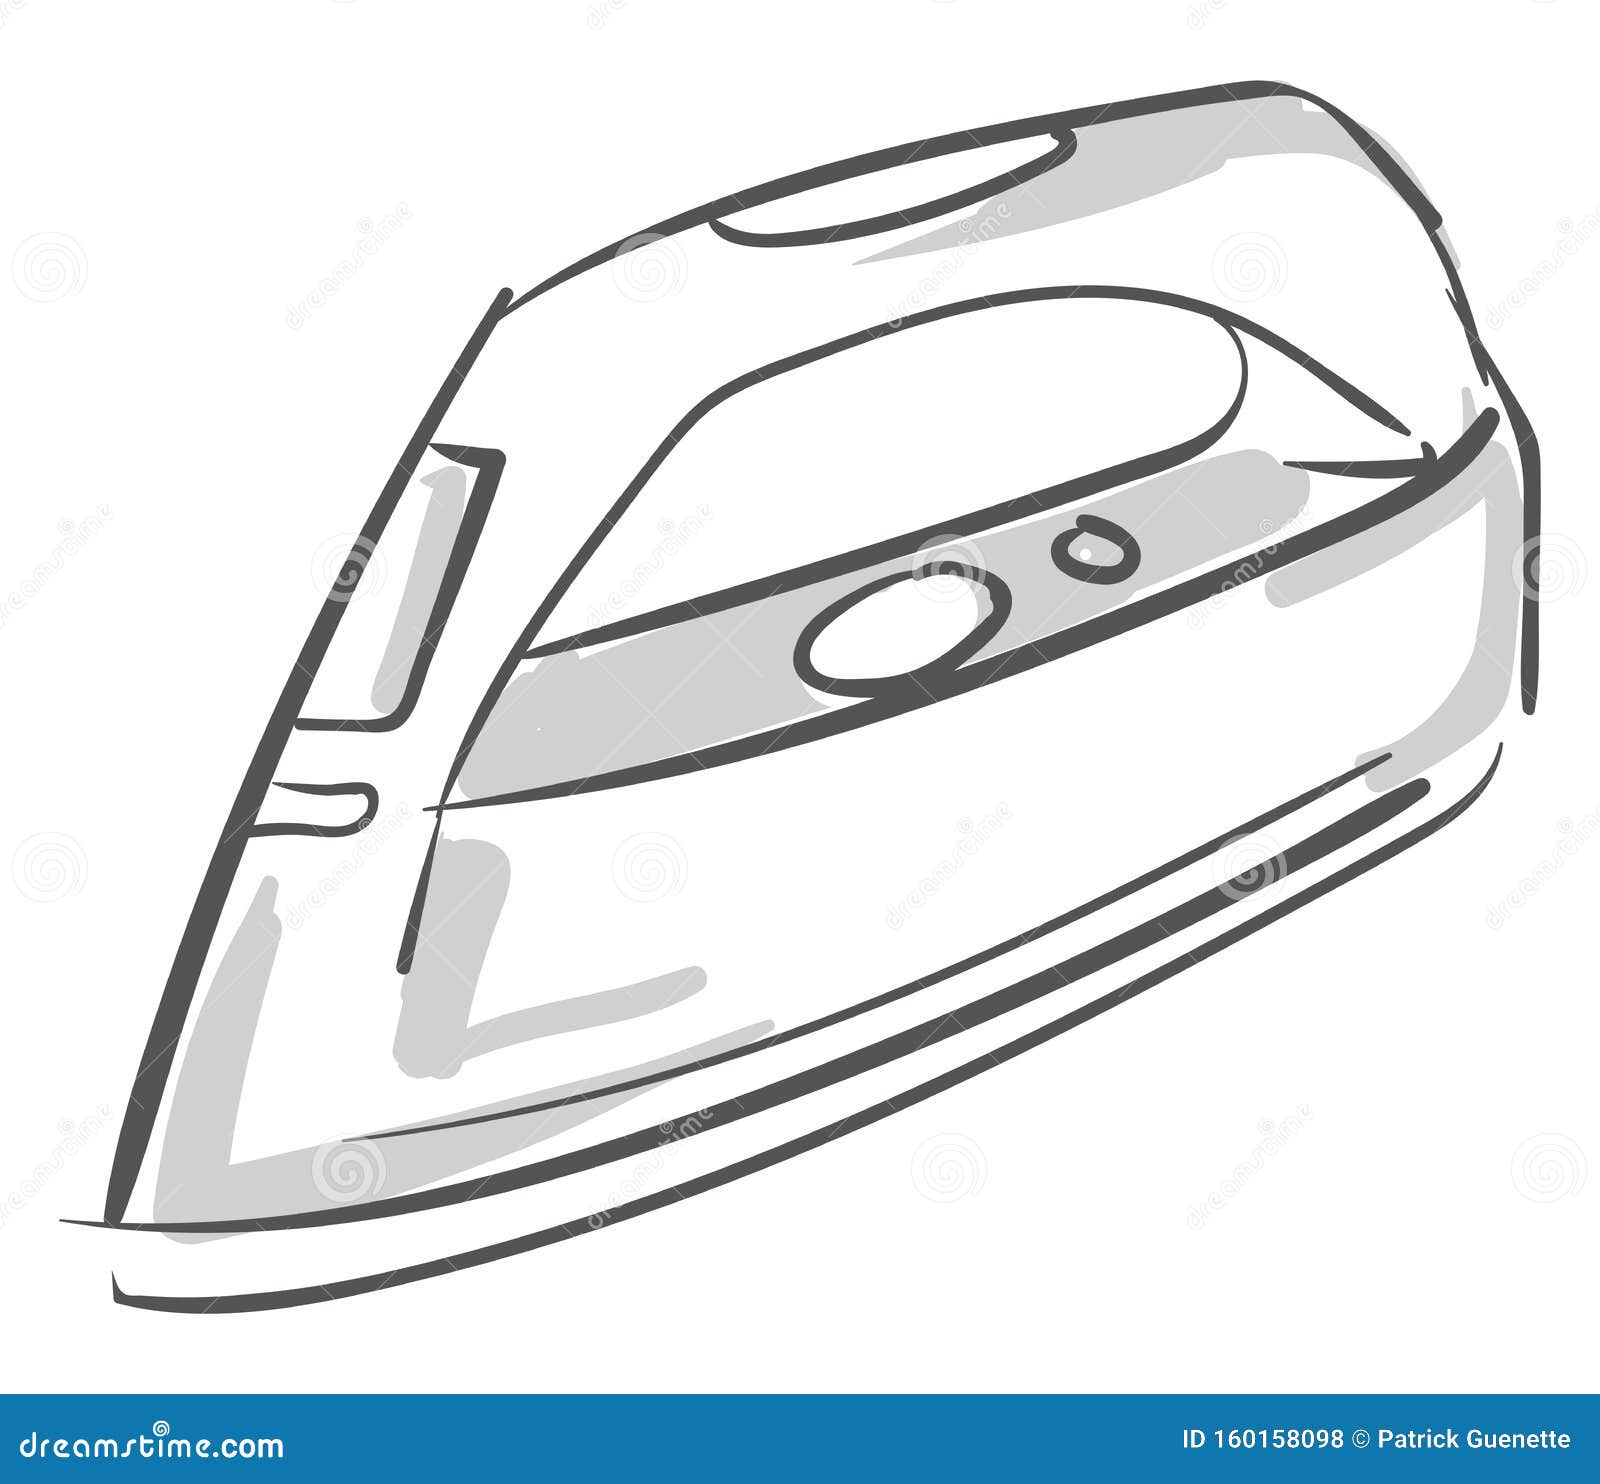 Iron Sketch Smoothing Vector Images 92